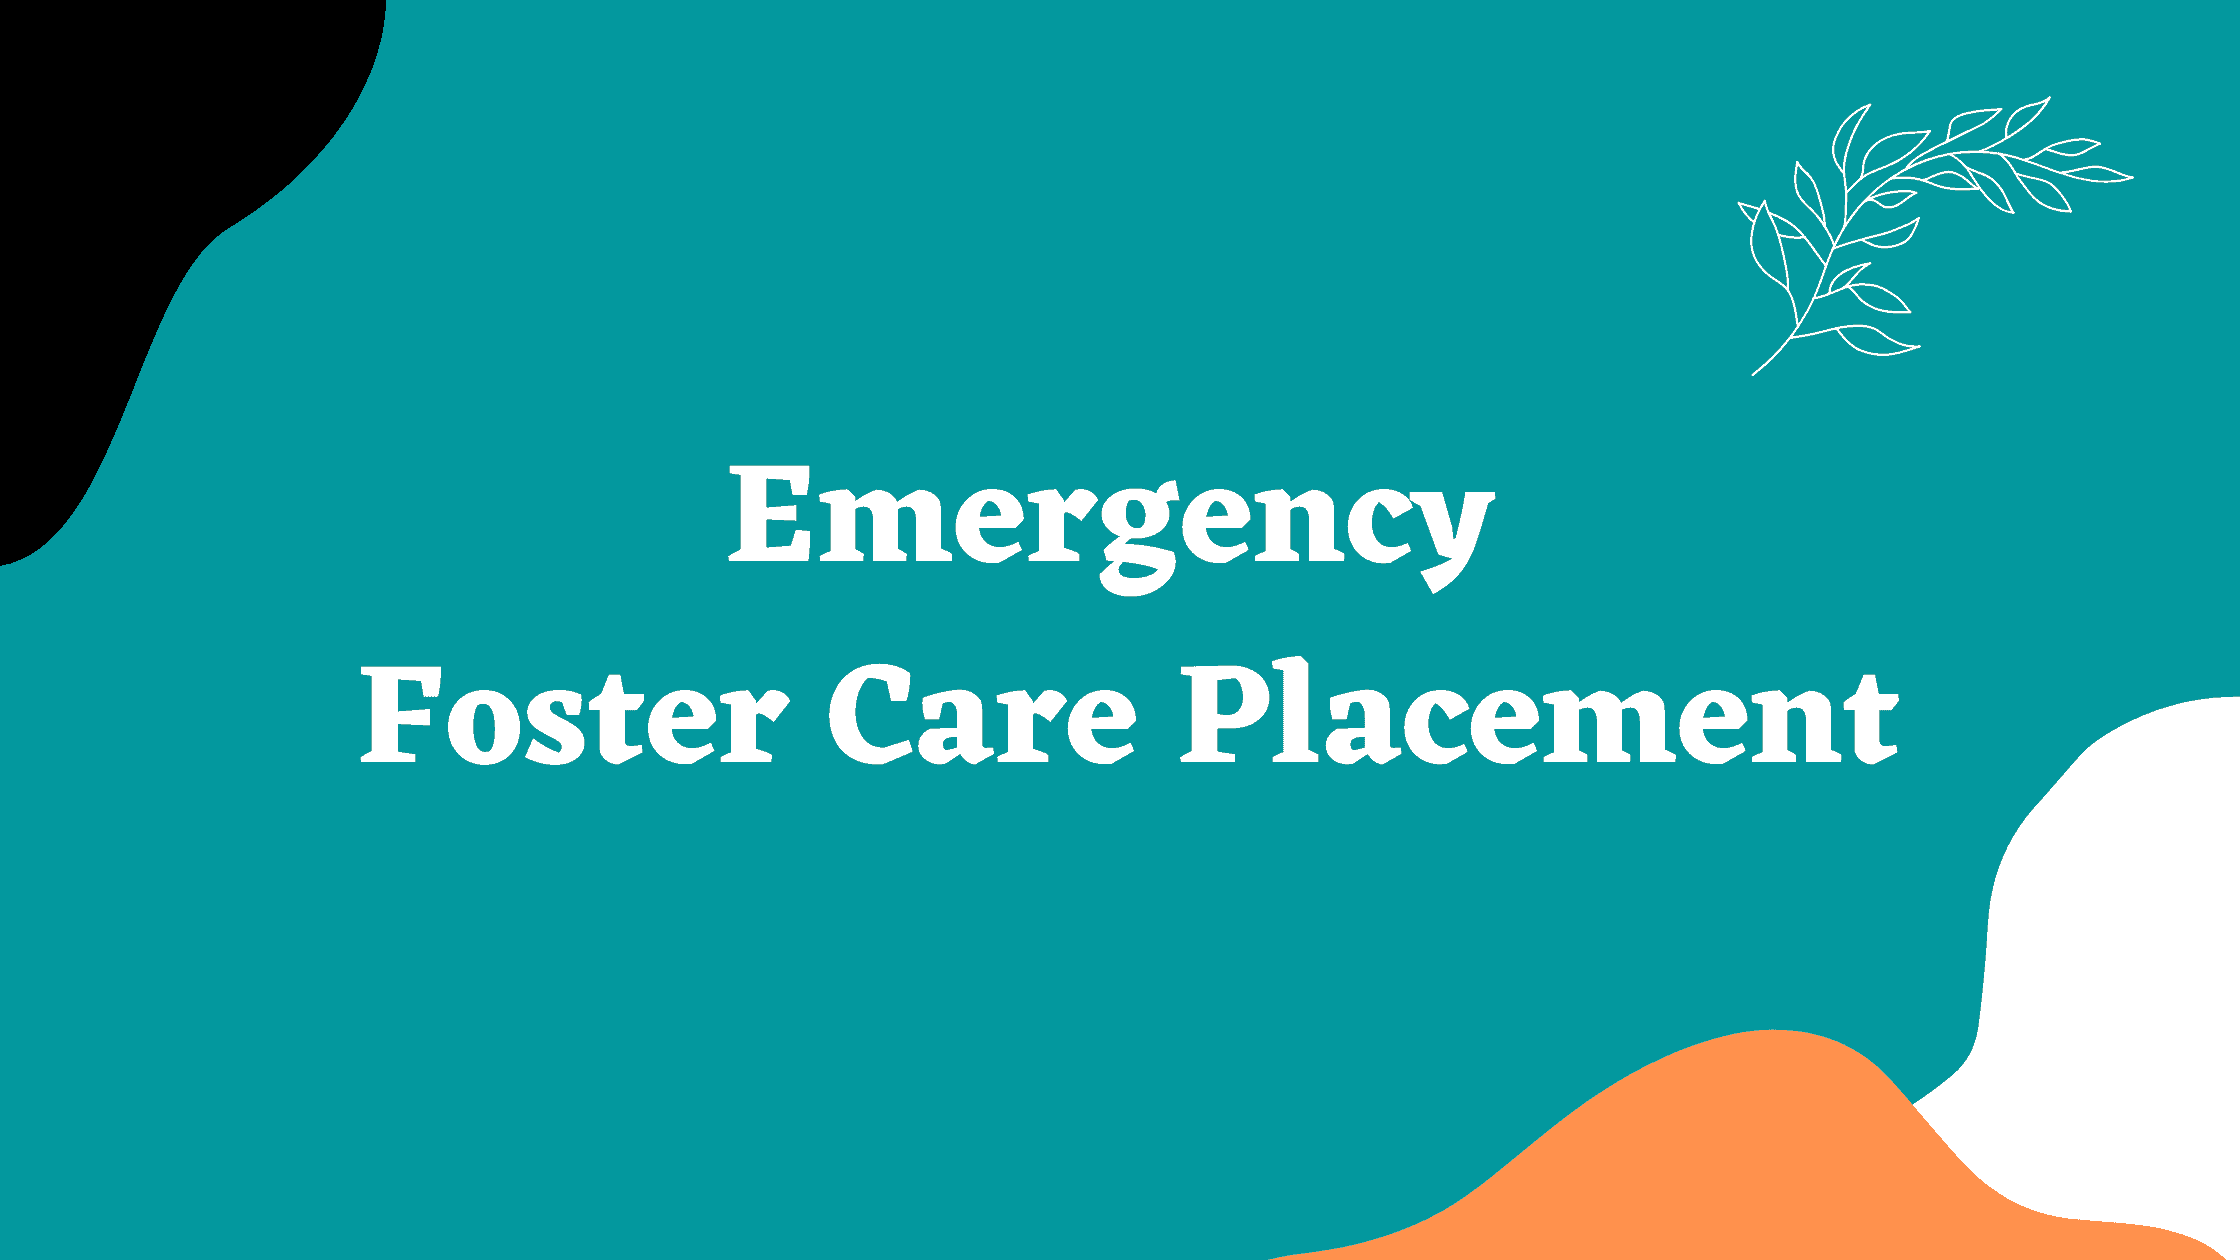 Emergency Foster Care Placement